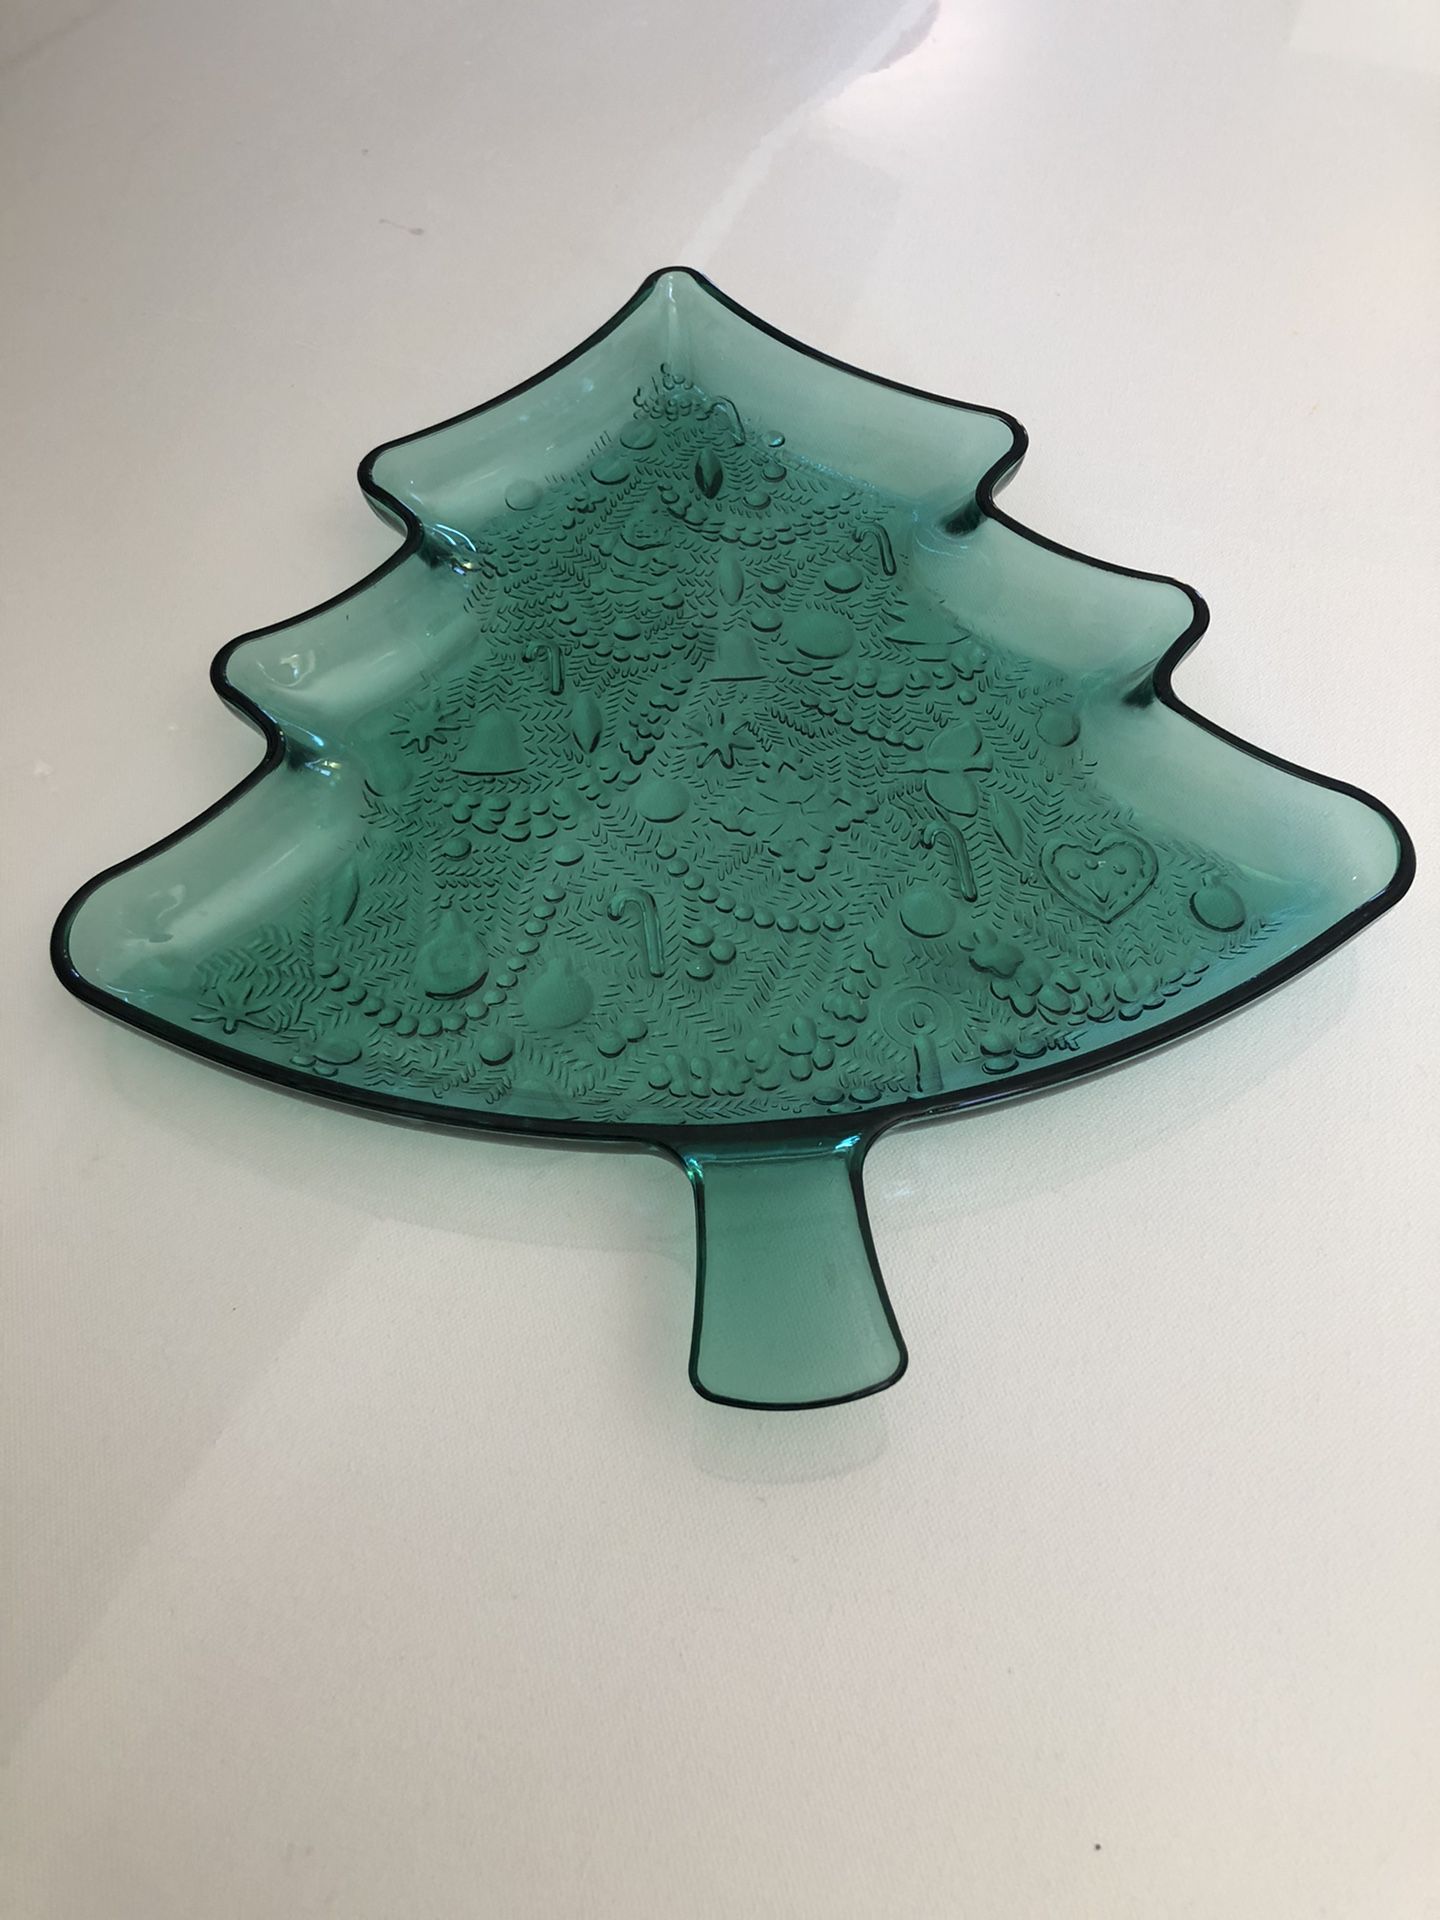 Vintage Green Carnival Glass Christmas Tree Shaped Food Snack Tray Platter Plate.  It measures 13 1/2" long with stem, 11 1/2" just the tray area, 12"